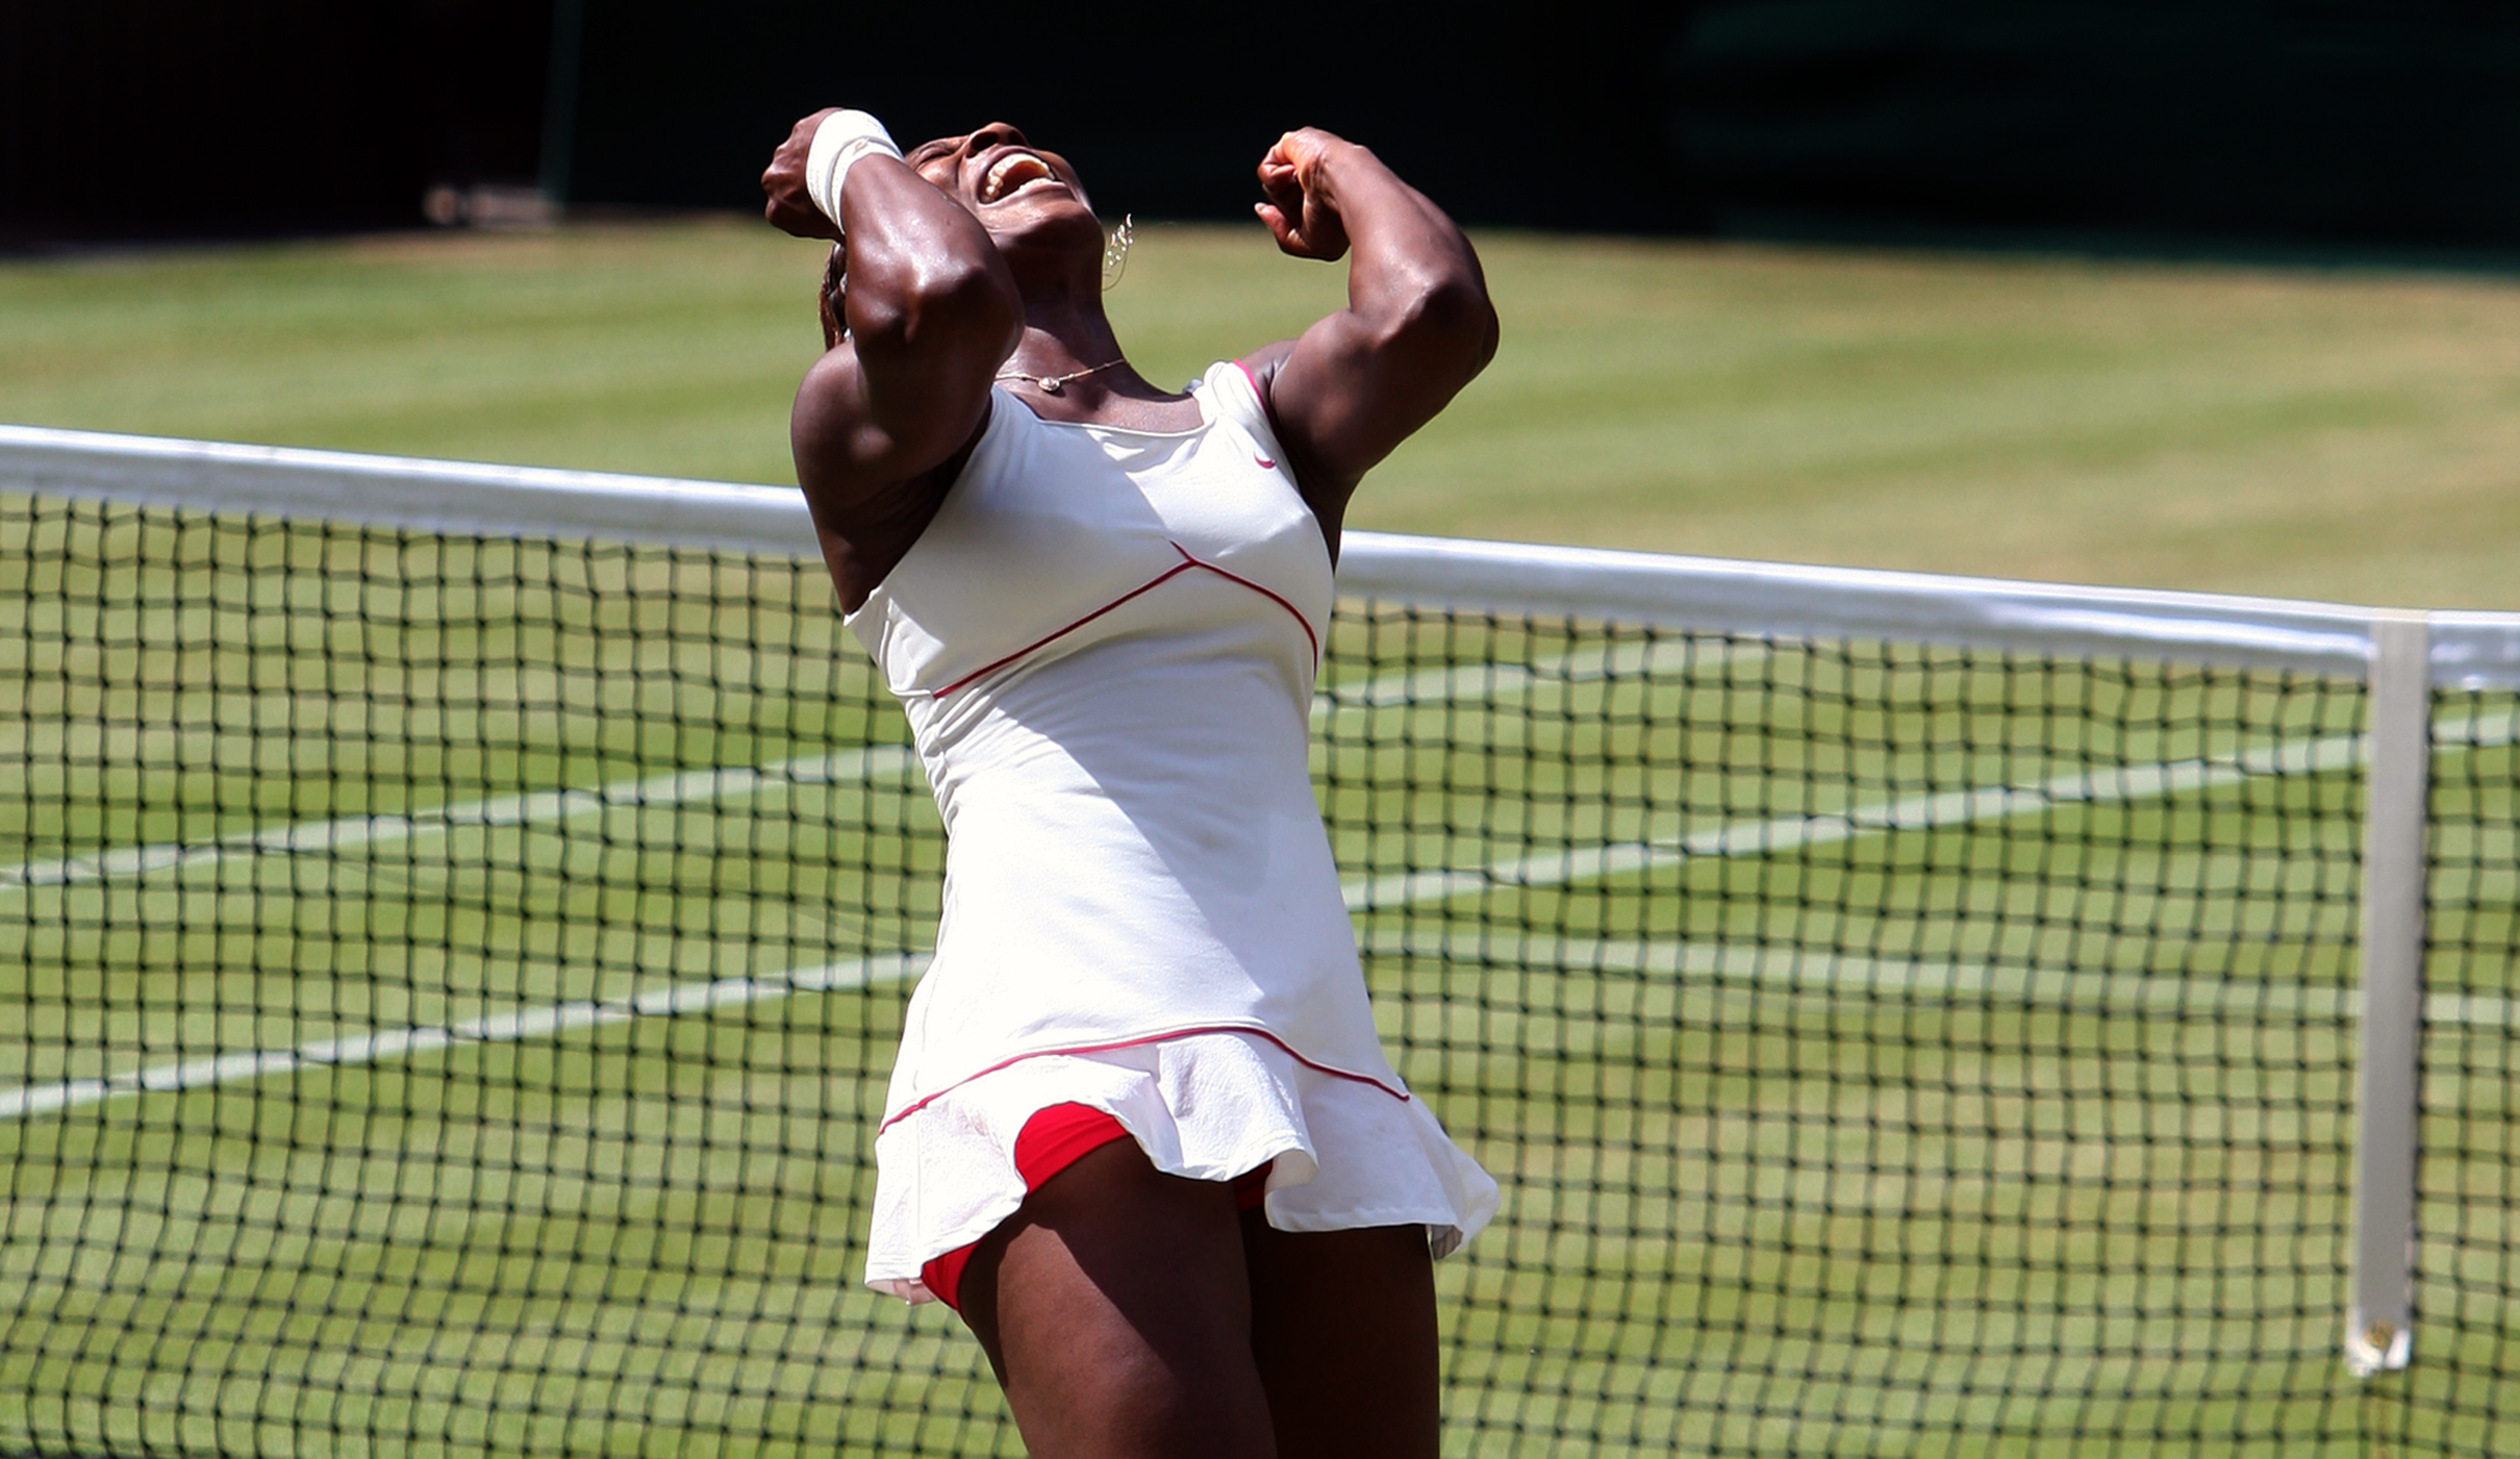 USA's Serena Williams celebrates her victory over Russia's Vera Zvonareva in the Ladies Singles Final on Day Twelve of the 2010 Wimbledon Championships at the All England Lawn Tennis Club, Wimbledon. (Photo by Andrew Milligan/PA Images via Getty Images) (Andrew Milligan - PA Images—PA Images via Getty Images)